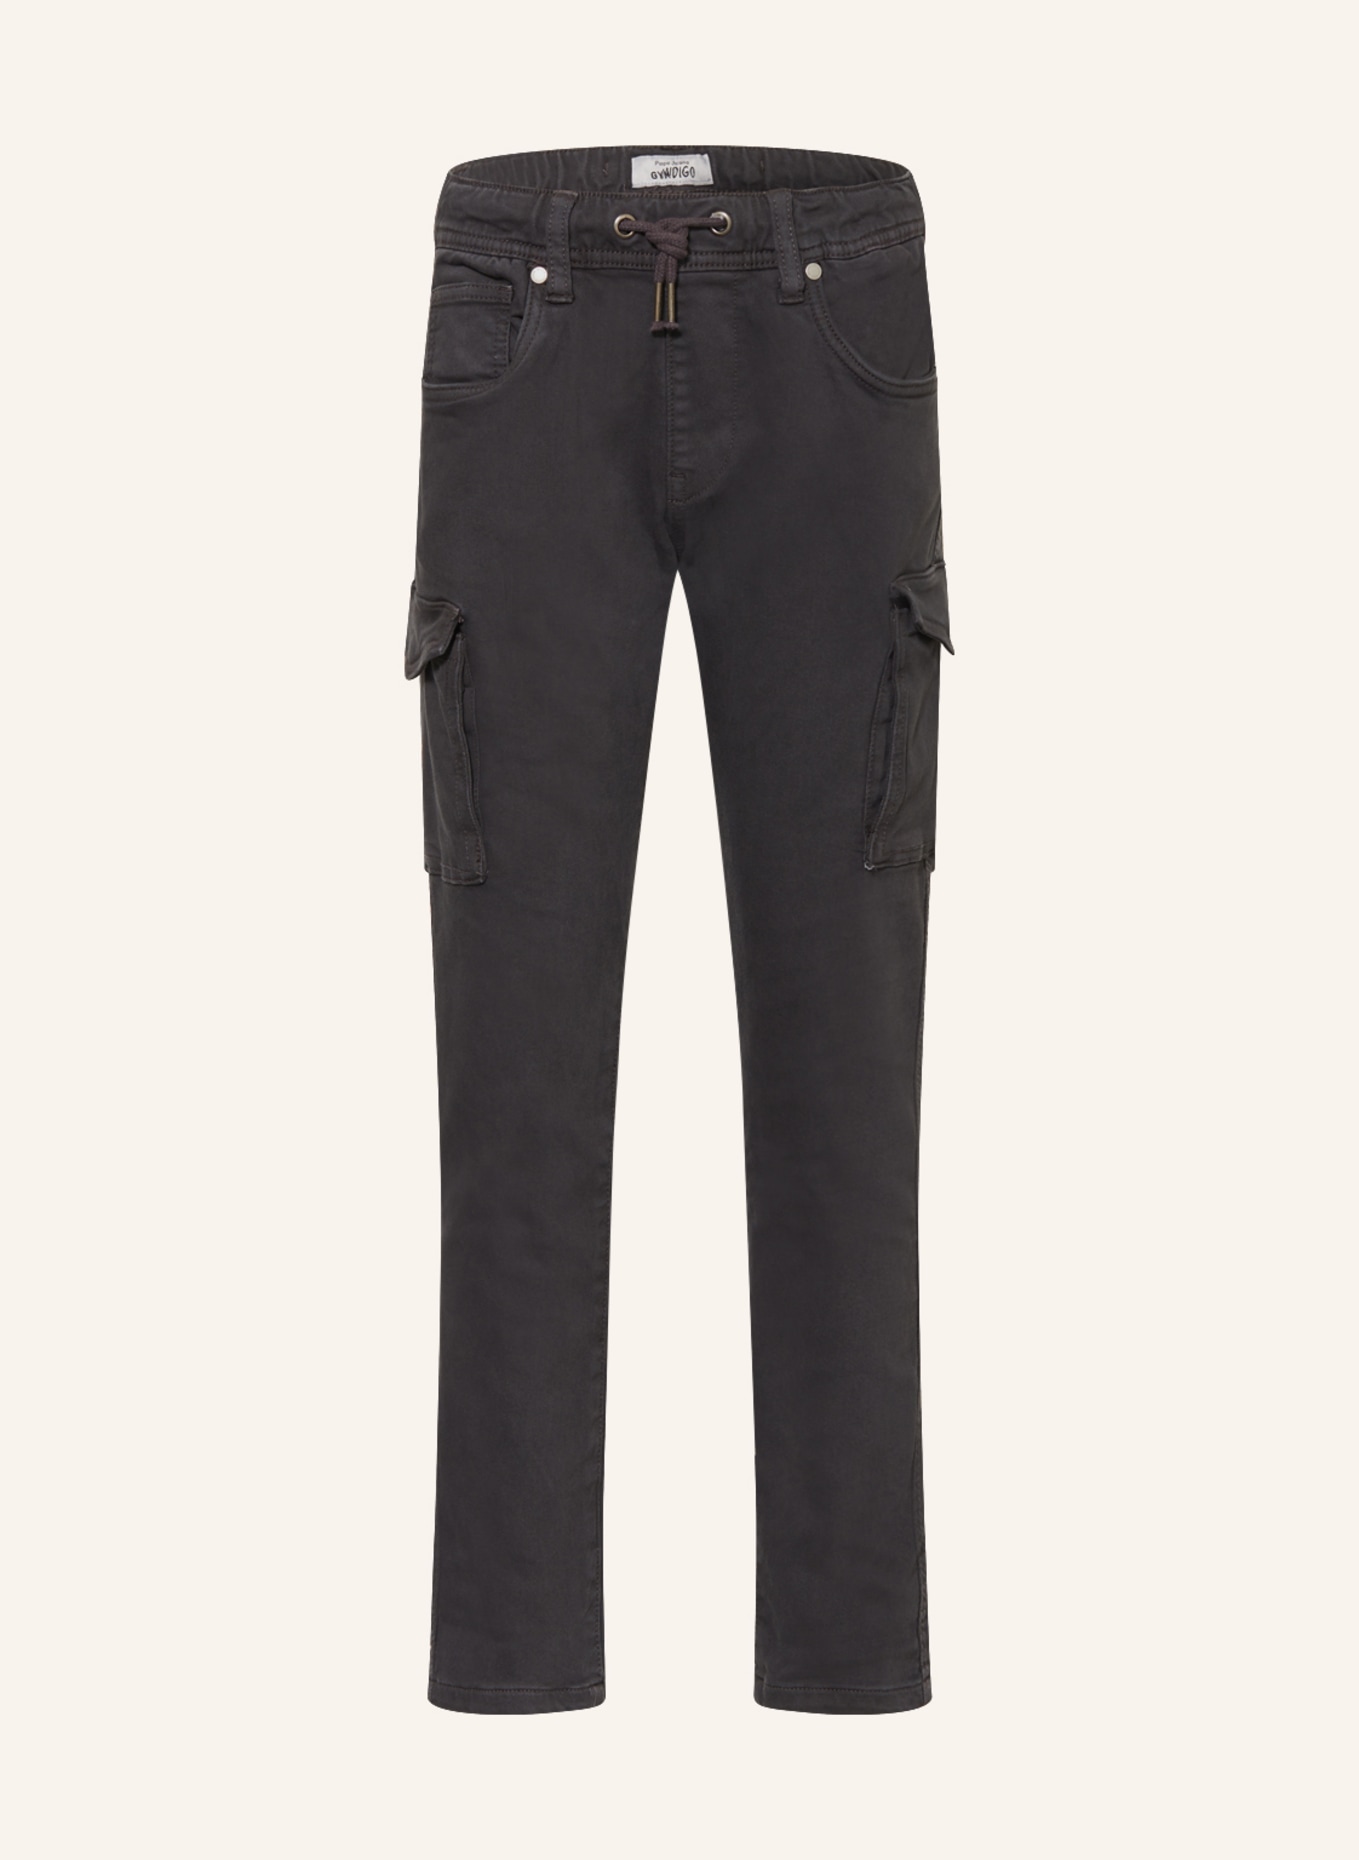 Pepe Jeans Cargohose CHASE CHARGO in schwarz